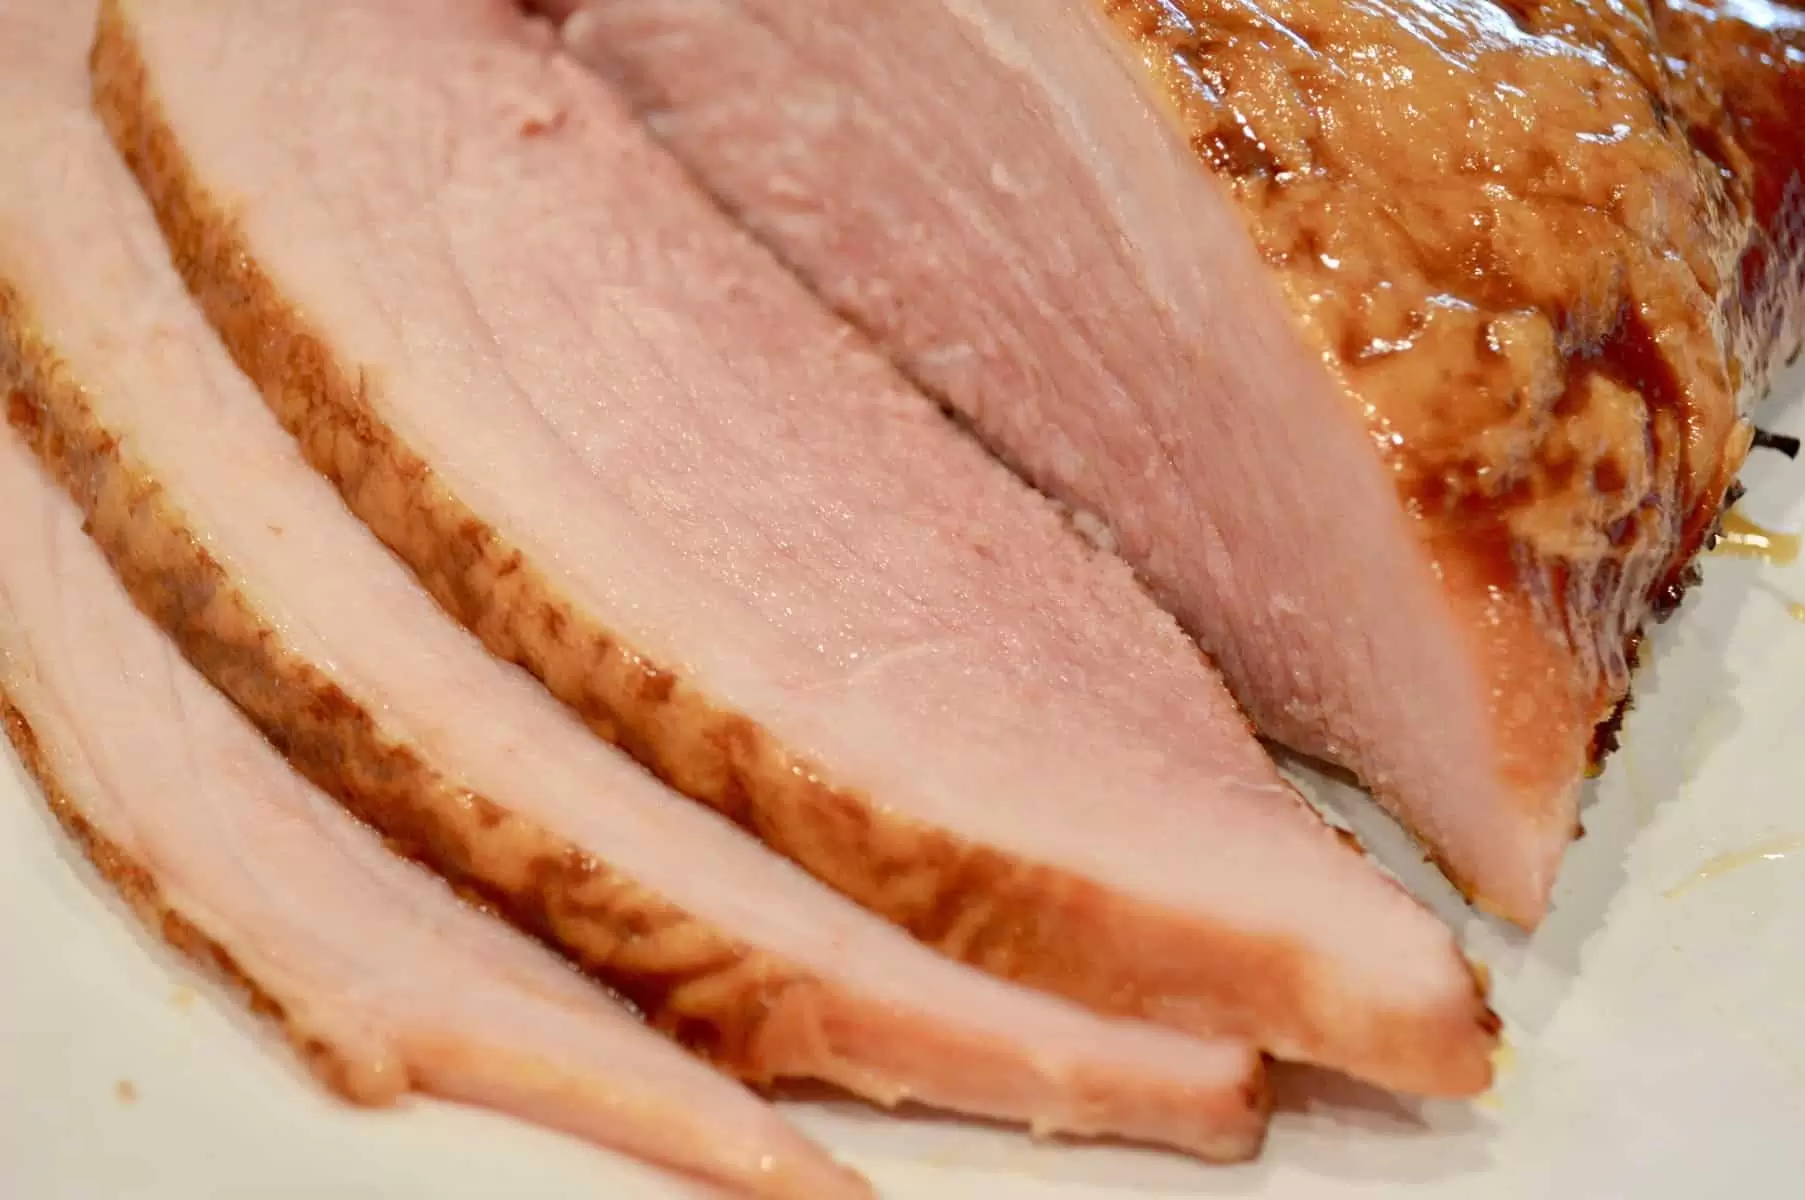 Slow Cooker Ham with Brown Sugar Glaze is so easy to make in your Crockpot! This easy healthy recipe is great for the holidays, easter, or just during the week. So simple, makes great leftovers, and can be done with boneless or spiral sliced ham. #crockpot #slowcooker #ham #easyrecipe #easter #weeknightdinner #healthyrecipe #simple #leftovers